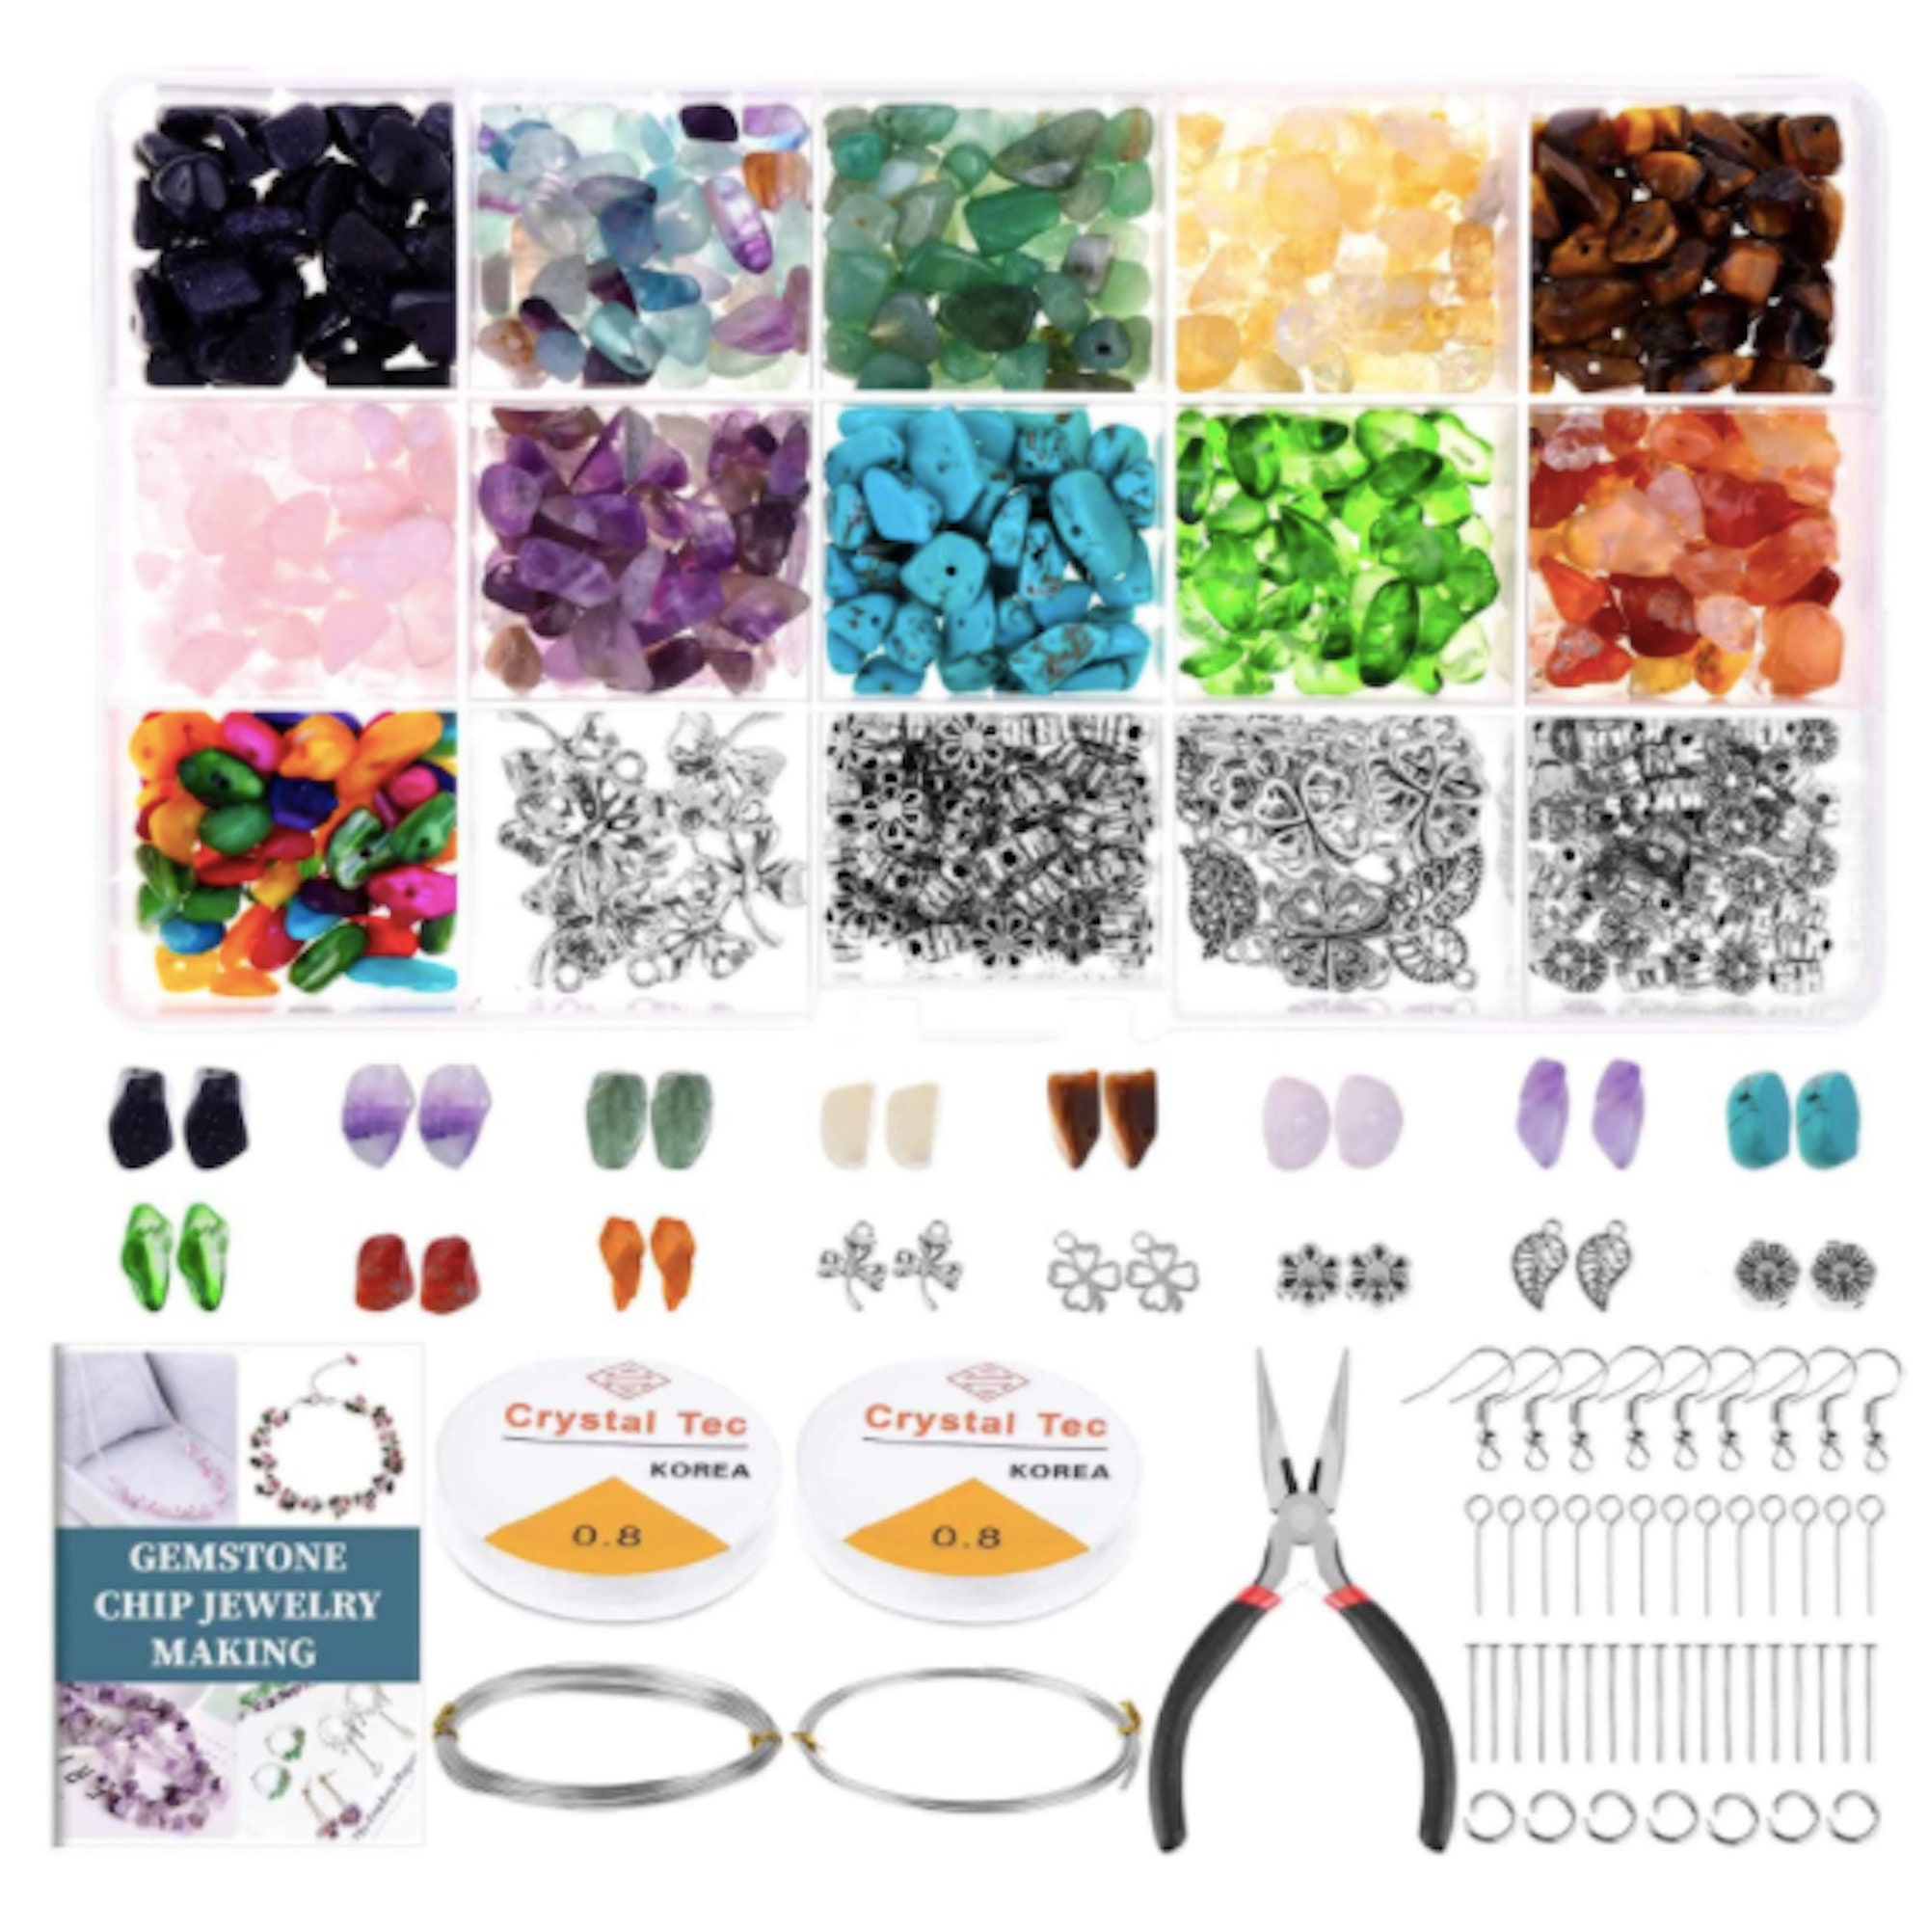 Ring Necklace Earring colorful1 Bracelet Gemstone Beads Accessories Set Quazilli Jewellery Making Kit Irregular Chips Stone Beads for Jewelry Making